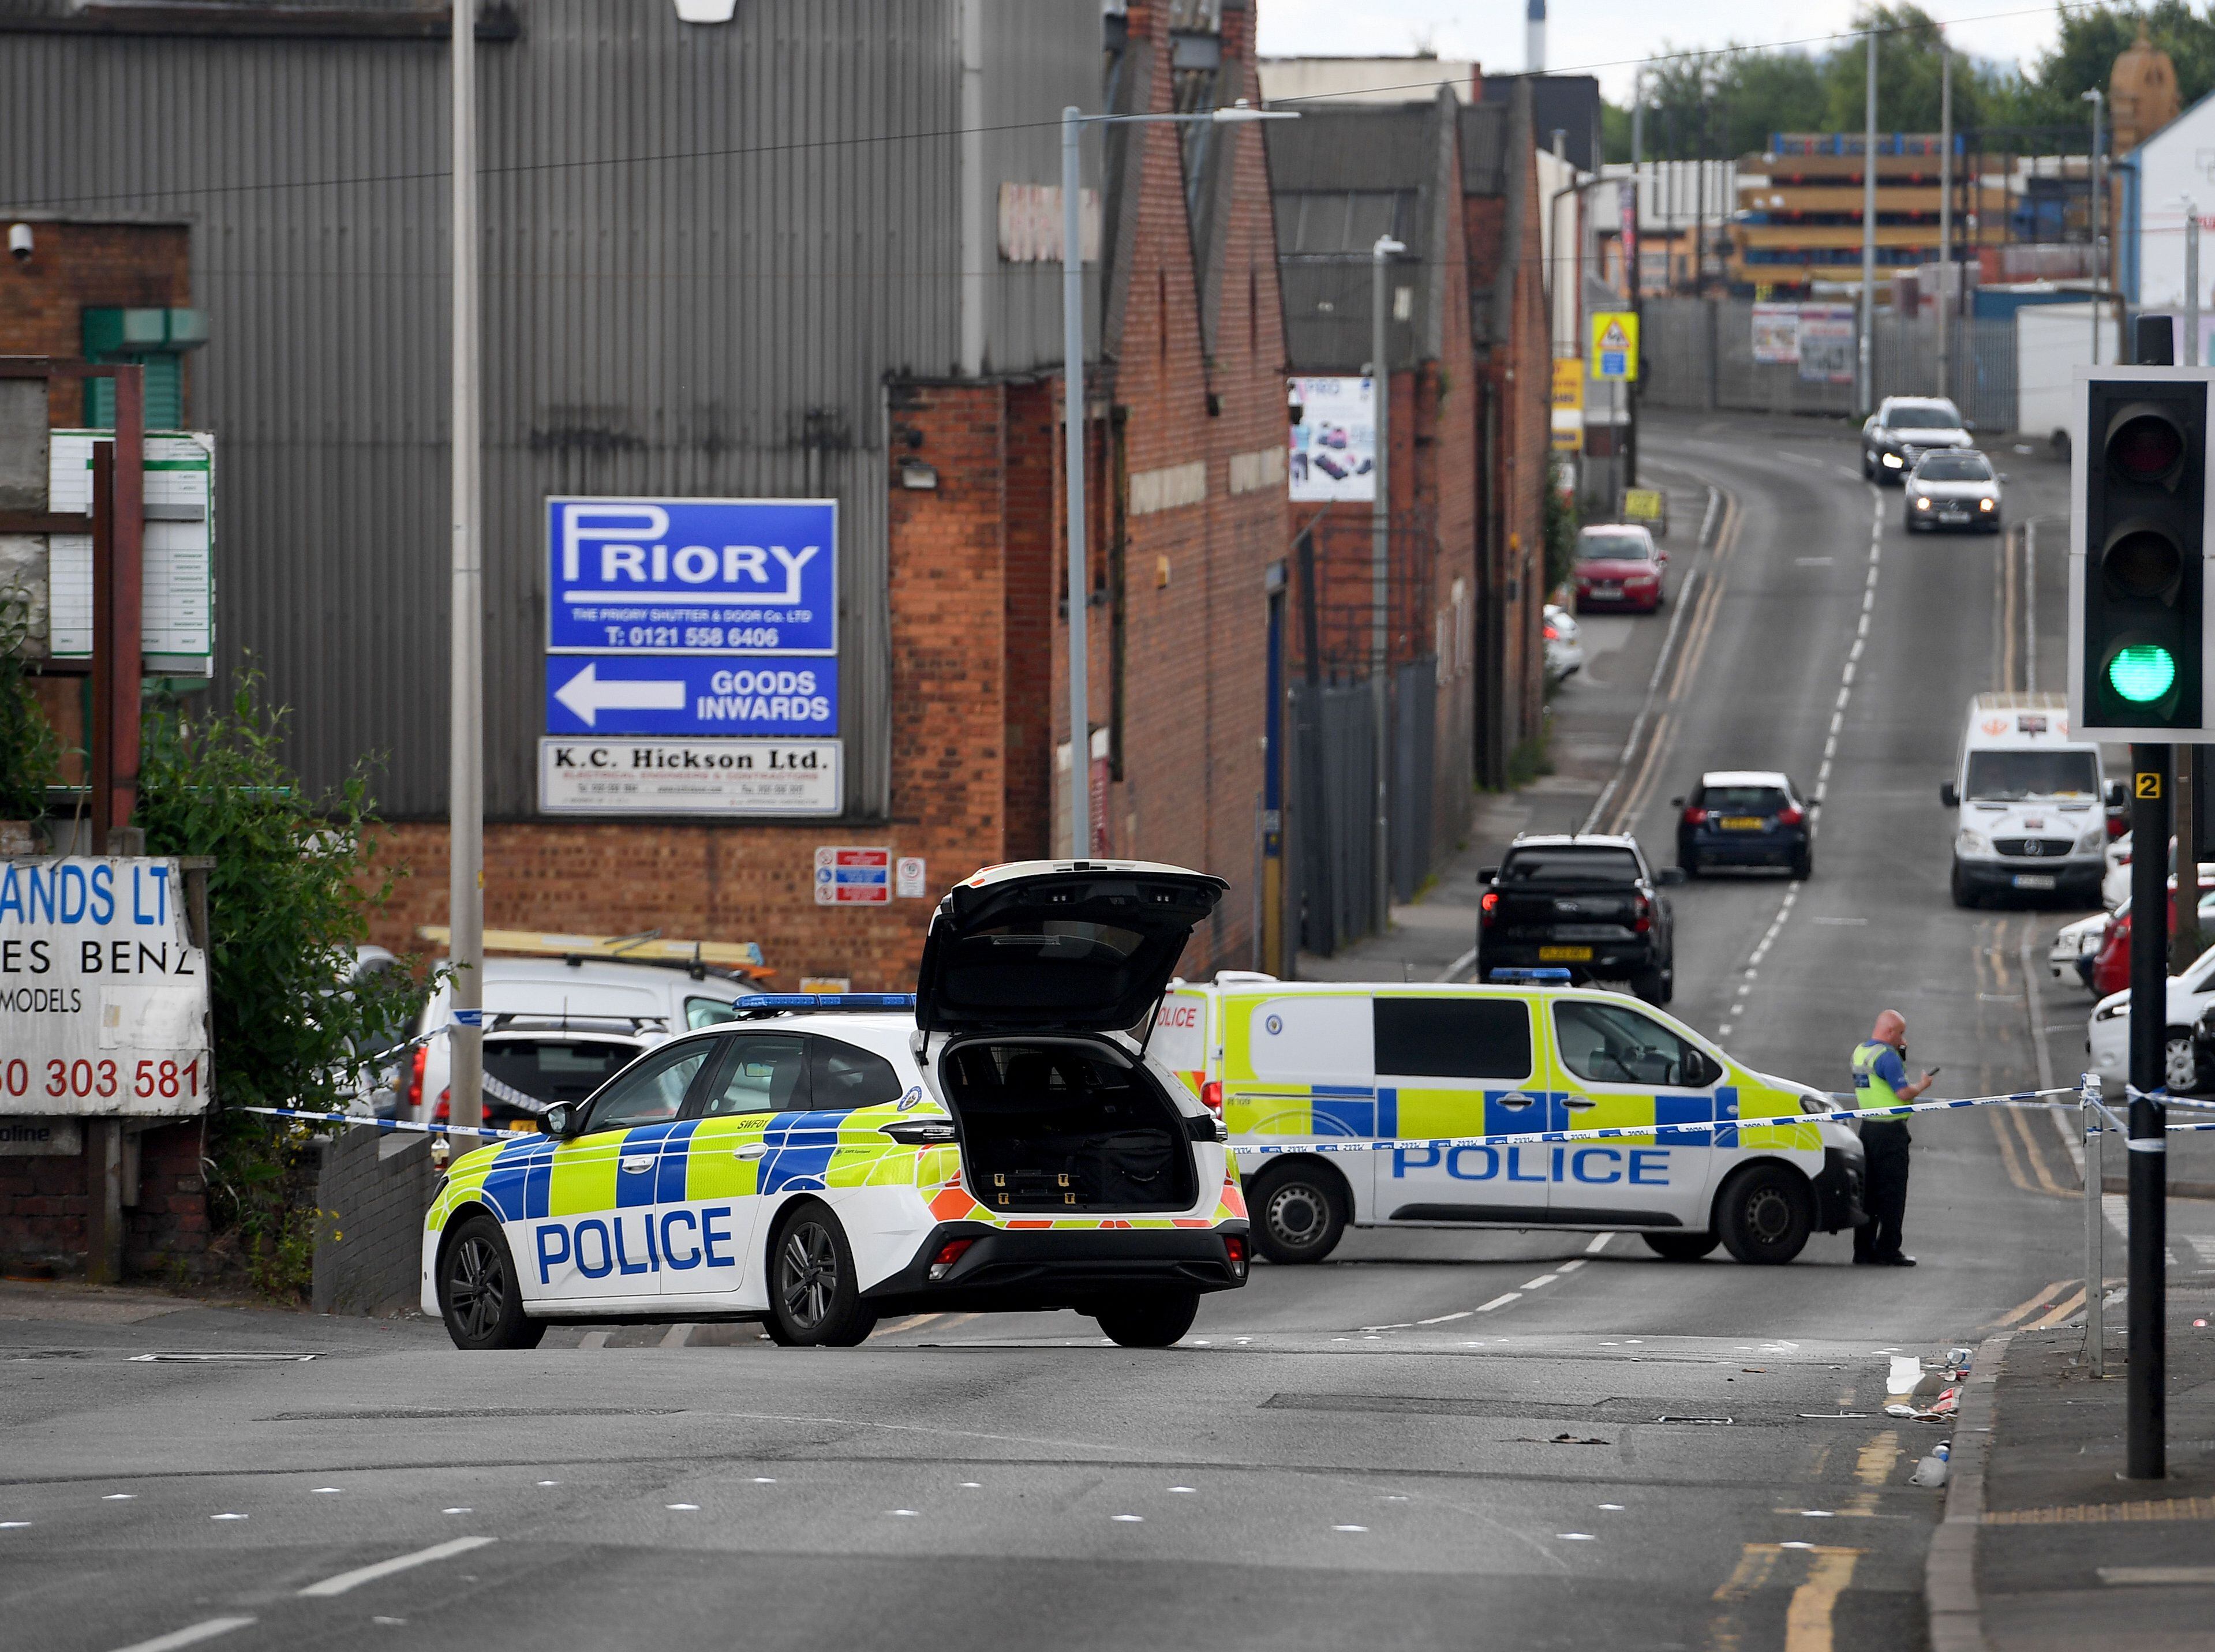 'Not the first time terror has struck on the street': Residents react to Smethwick shooting 